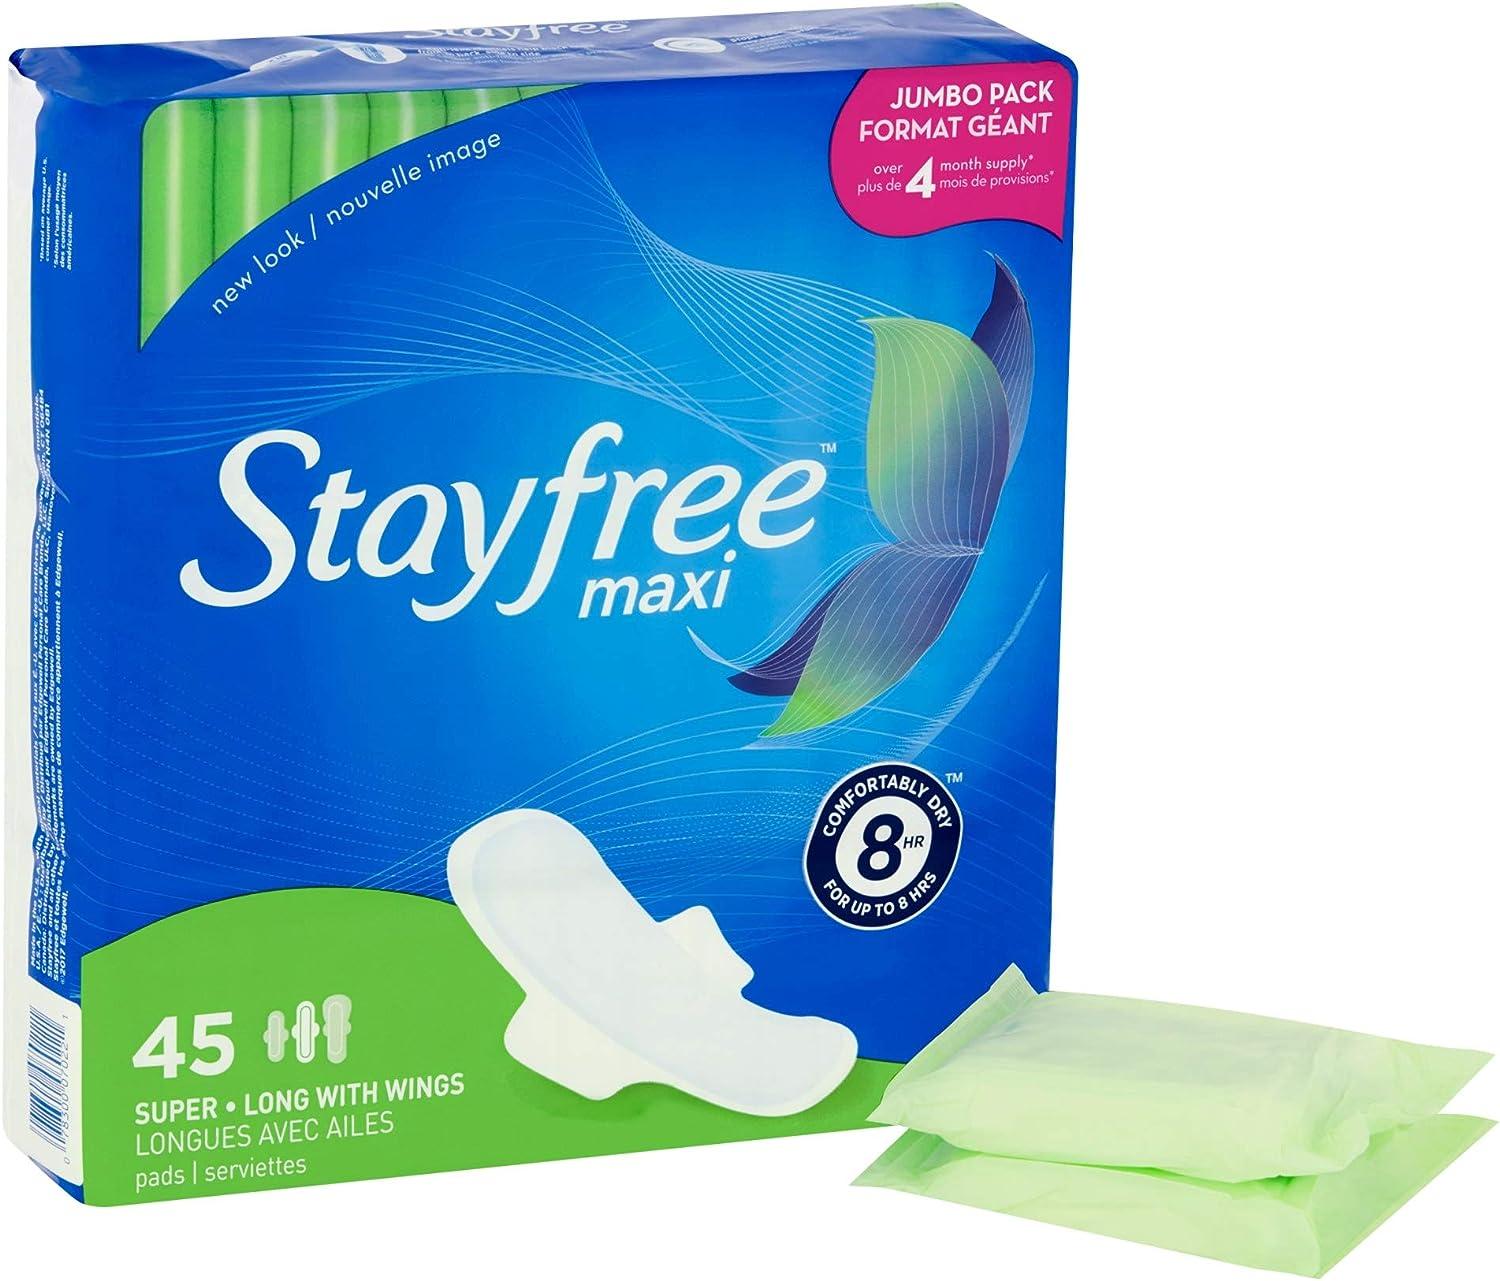 Carefree® Super Dry Panty Liners for Women - Stayfree® India